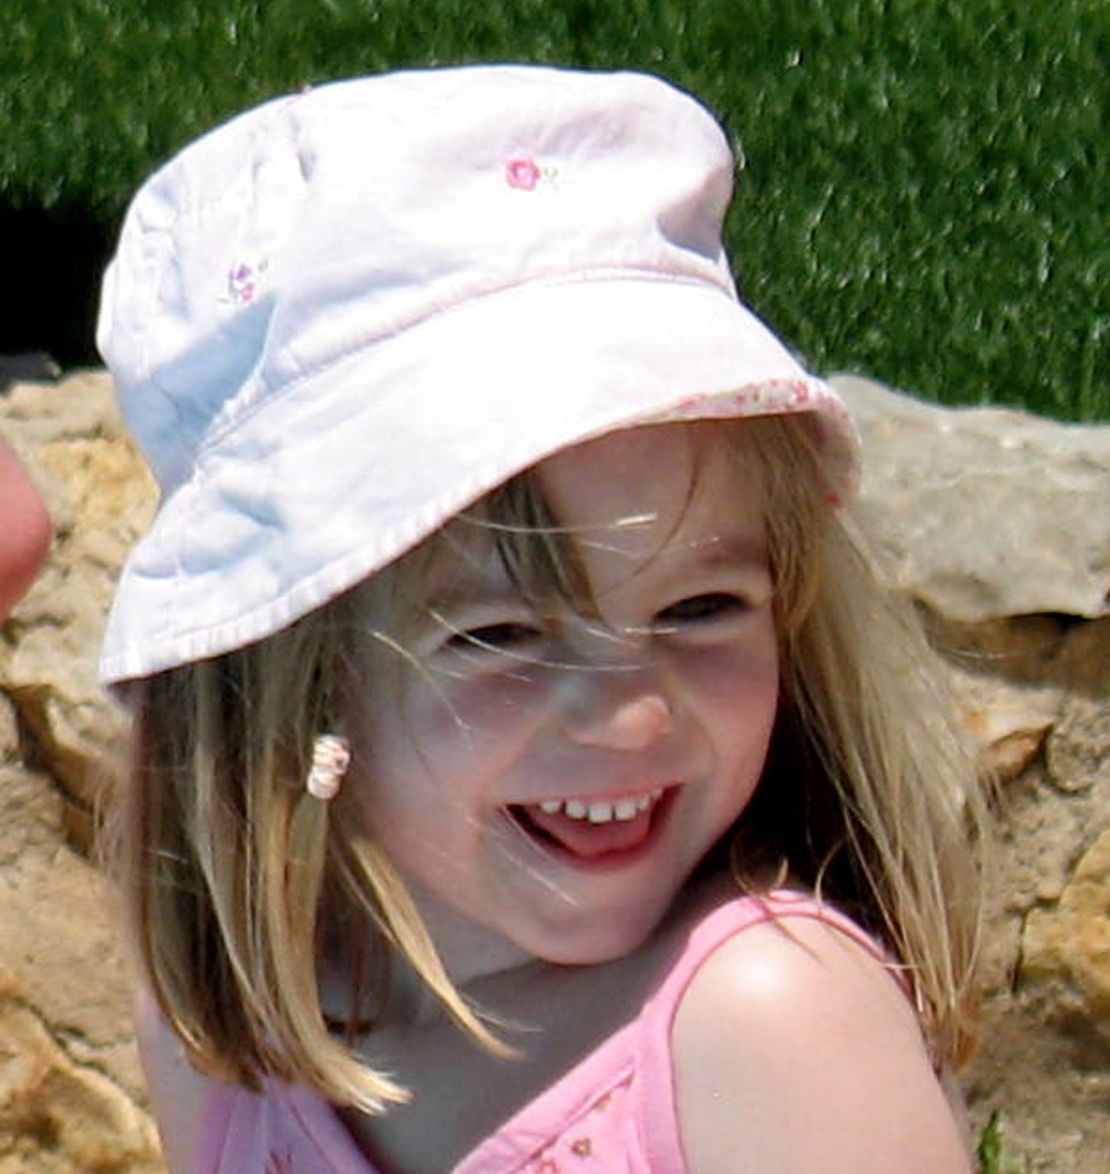 Madeleine McCann on May 3, 2007, the same day she went missing .